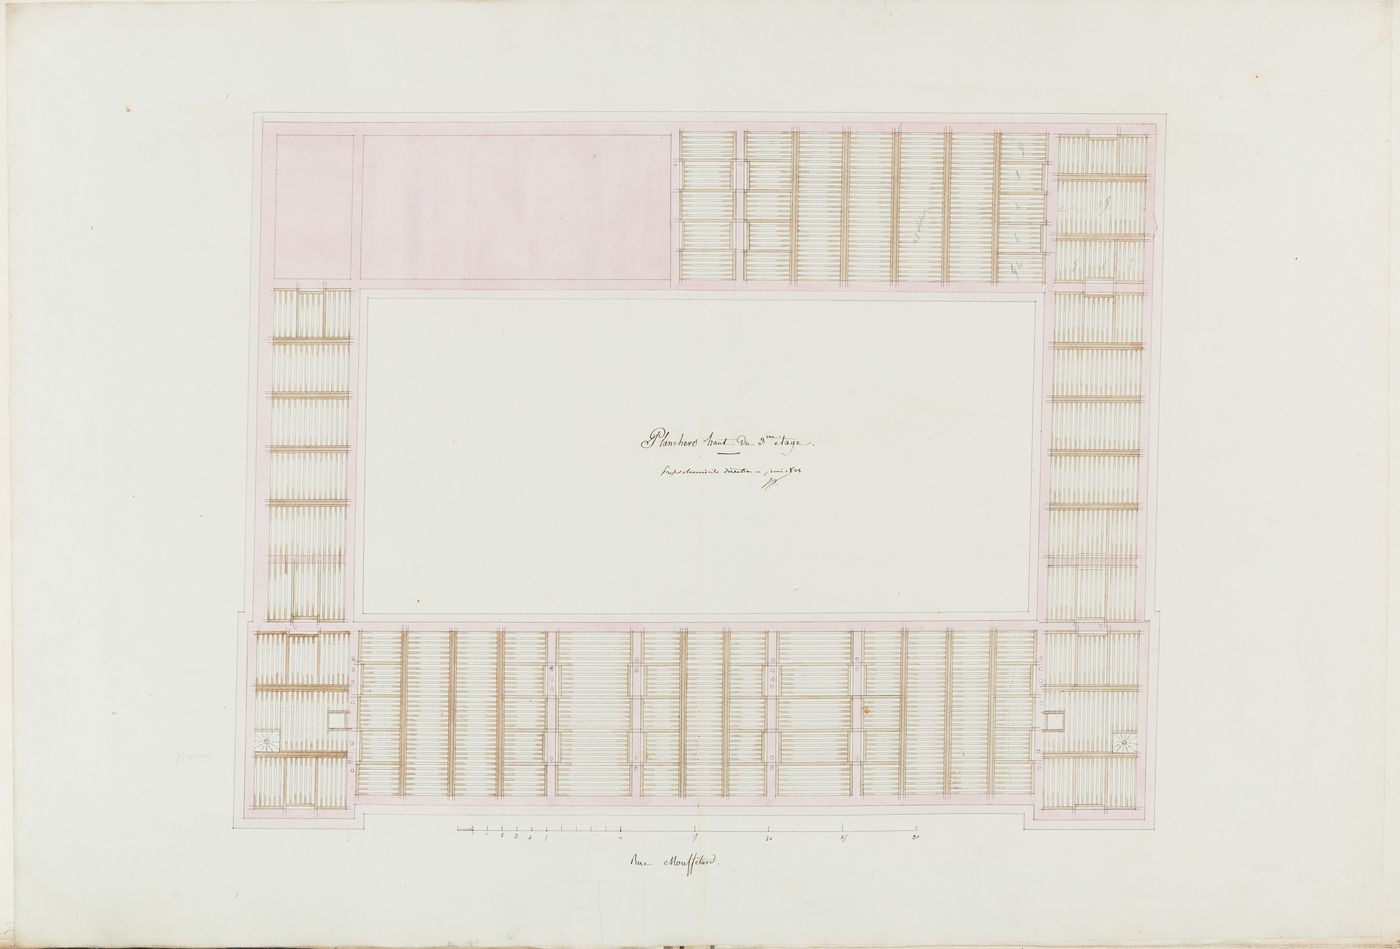 Project for the caserne de la Gendarmerie royale, rue Mouffetard: Floor framing plan for the buildings surrounding the first courtyard, probably for the "comble"